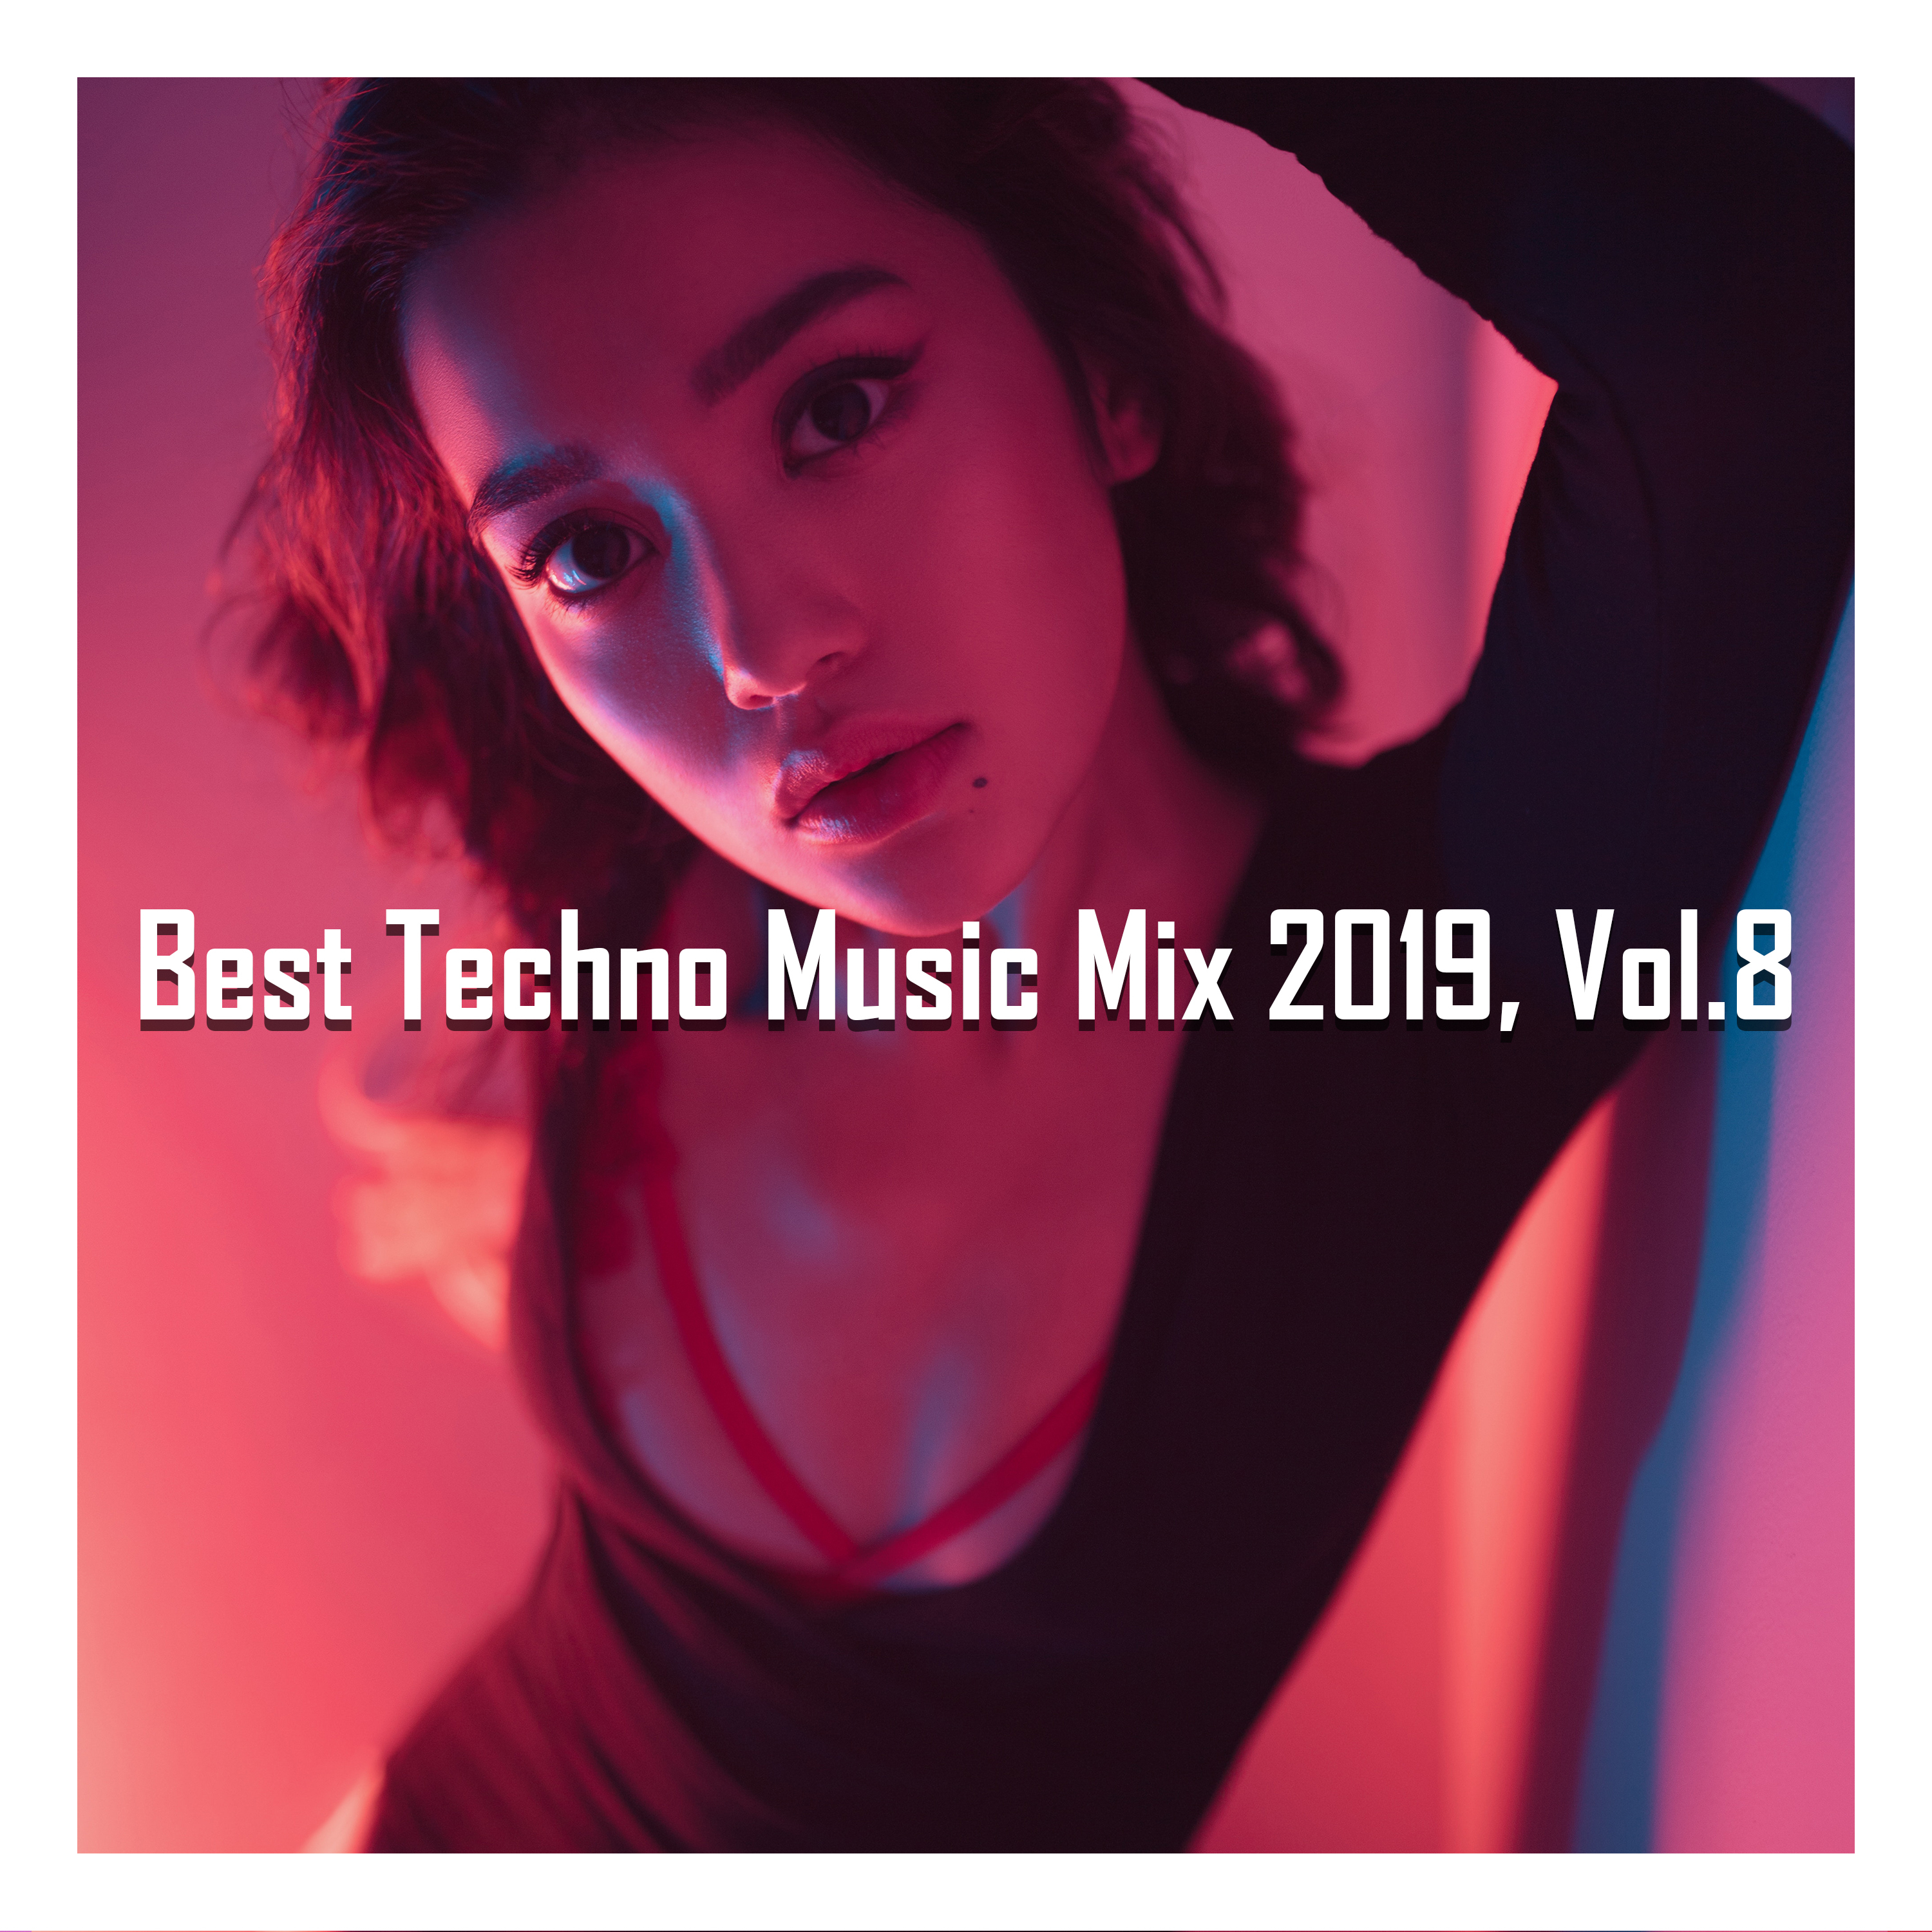 Best Techno Music Mix 2019, Vol. 8 (Compiled and Mixed by Gerti Prenjasi)